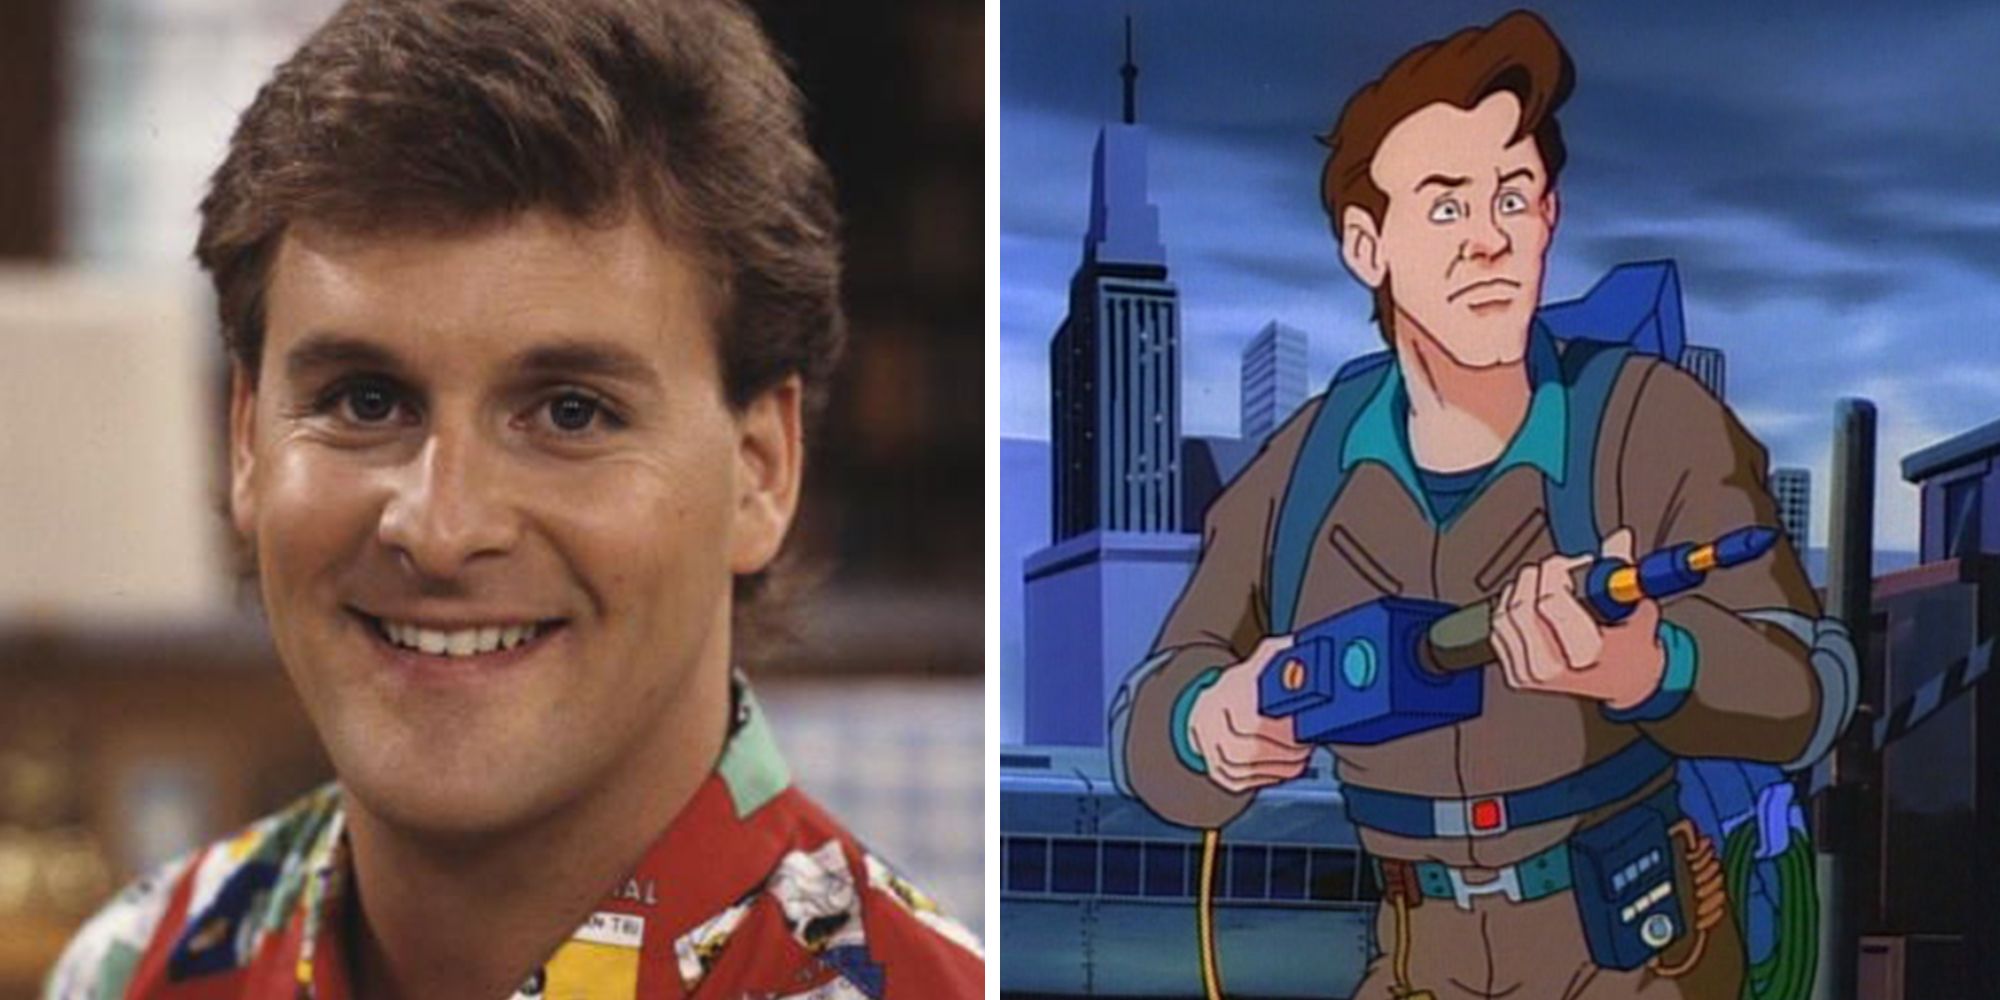 The Real Ghostbusters! Cast Guide Who Voices Every Character